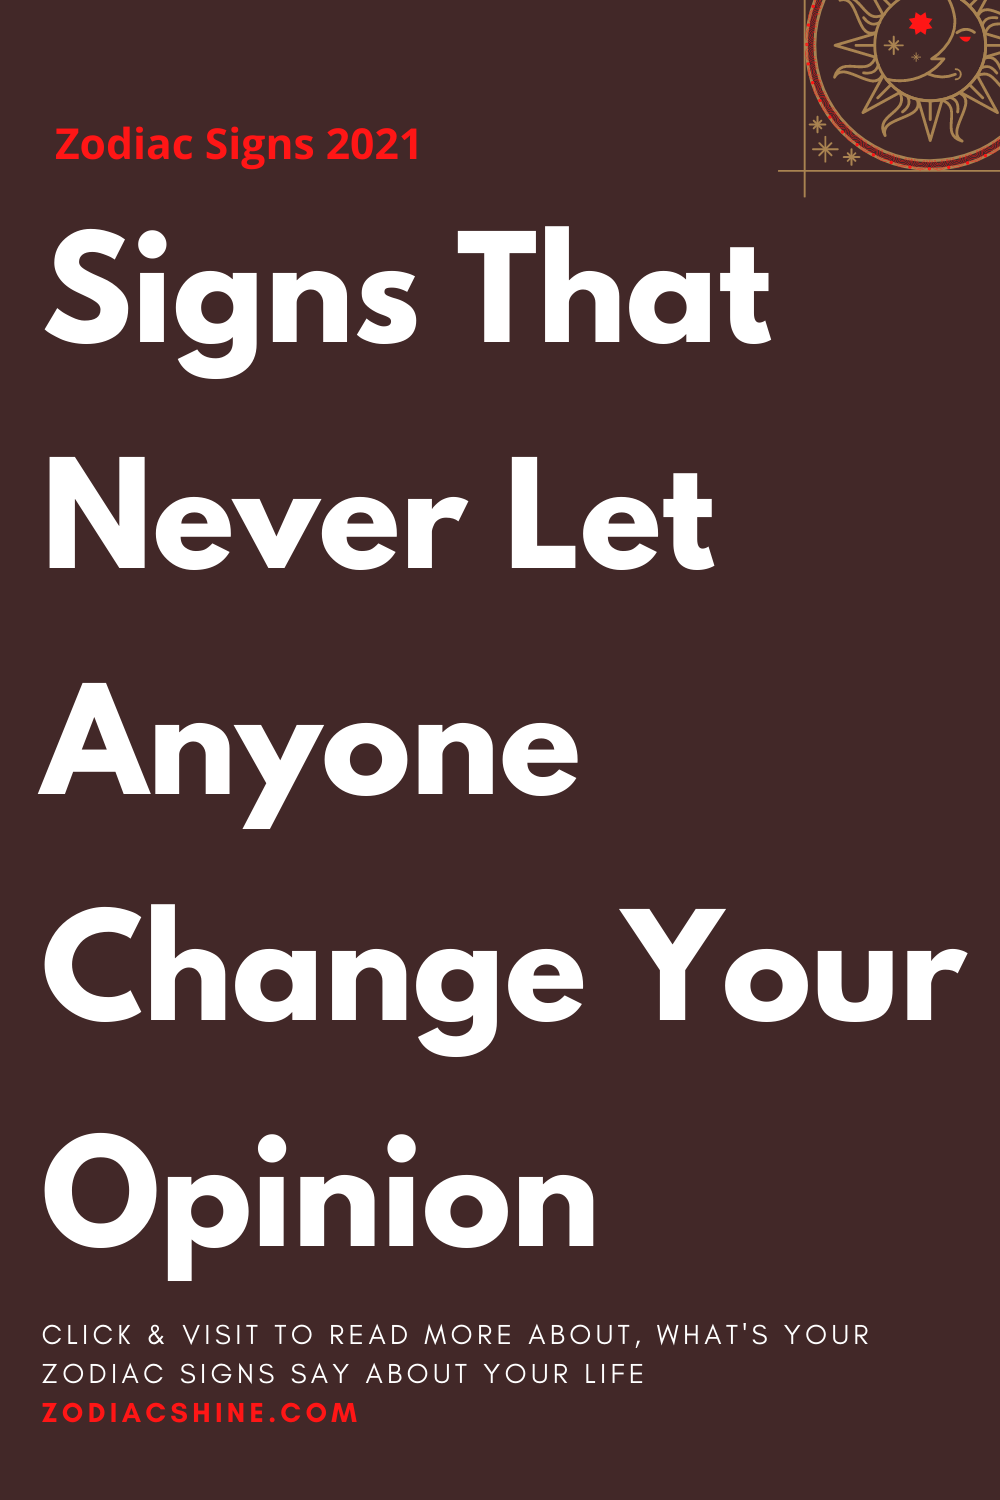 Signs That Never Let Anyone Change Your Opinion